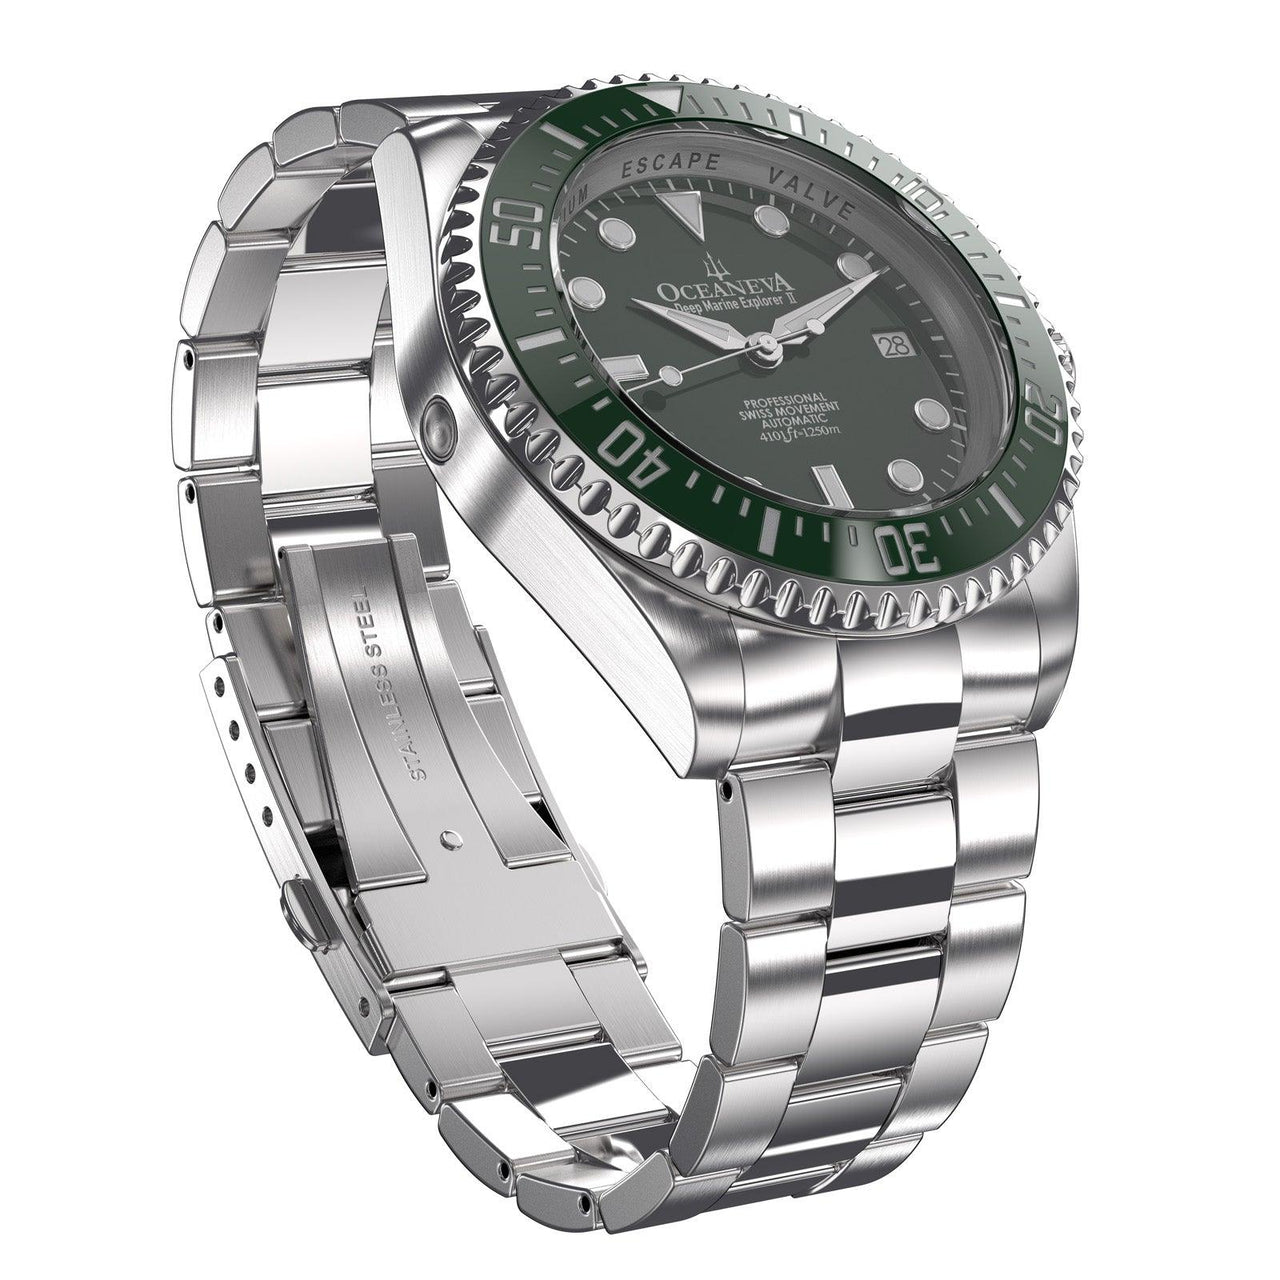 Oceaneva 1250M Dive Watch Green Front Picture Slight Right Slant View